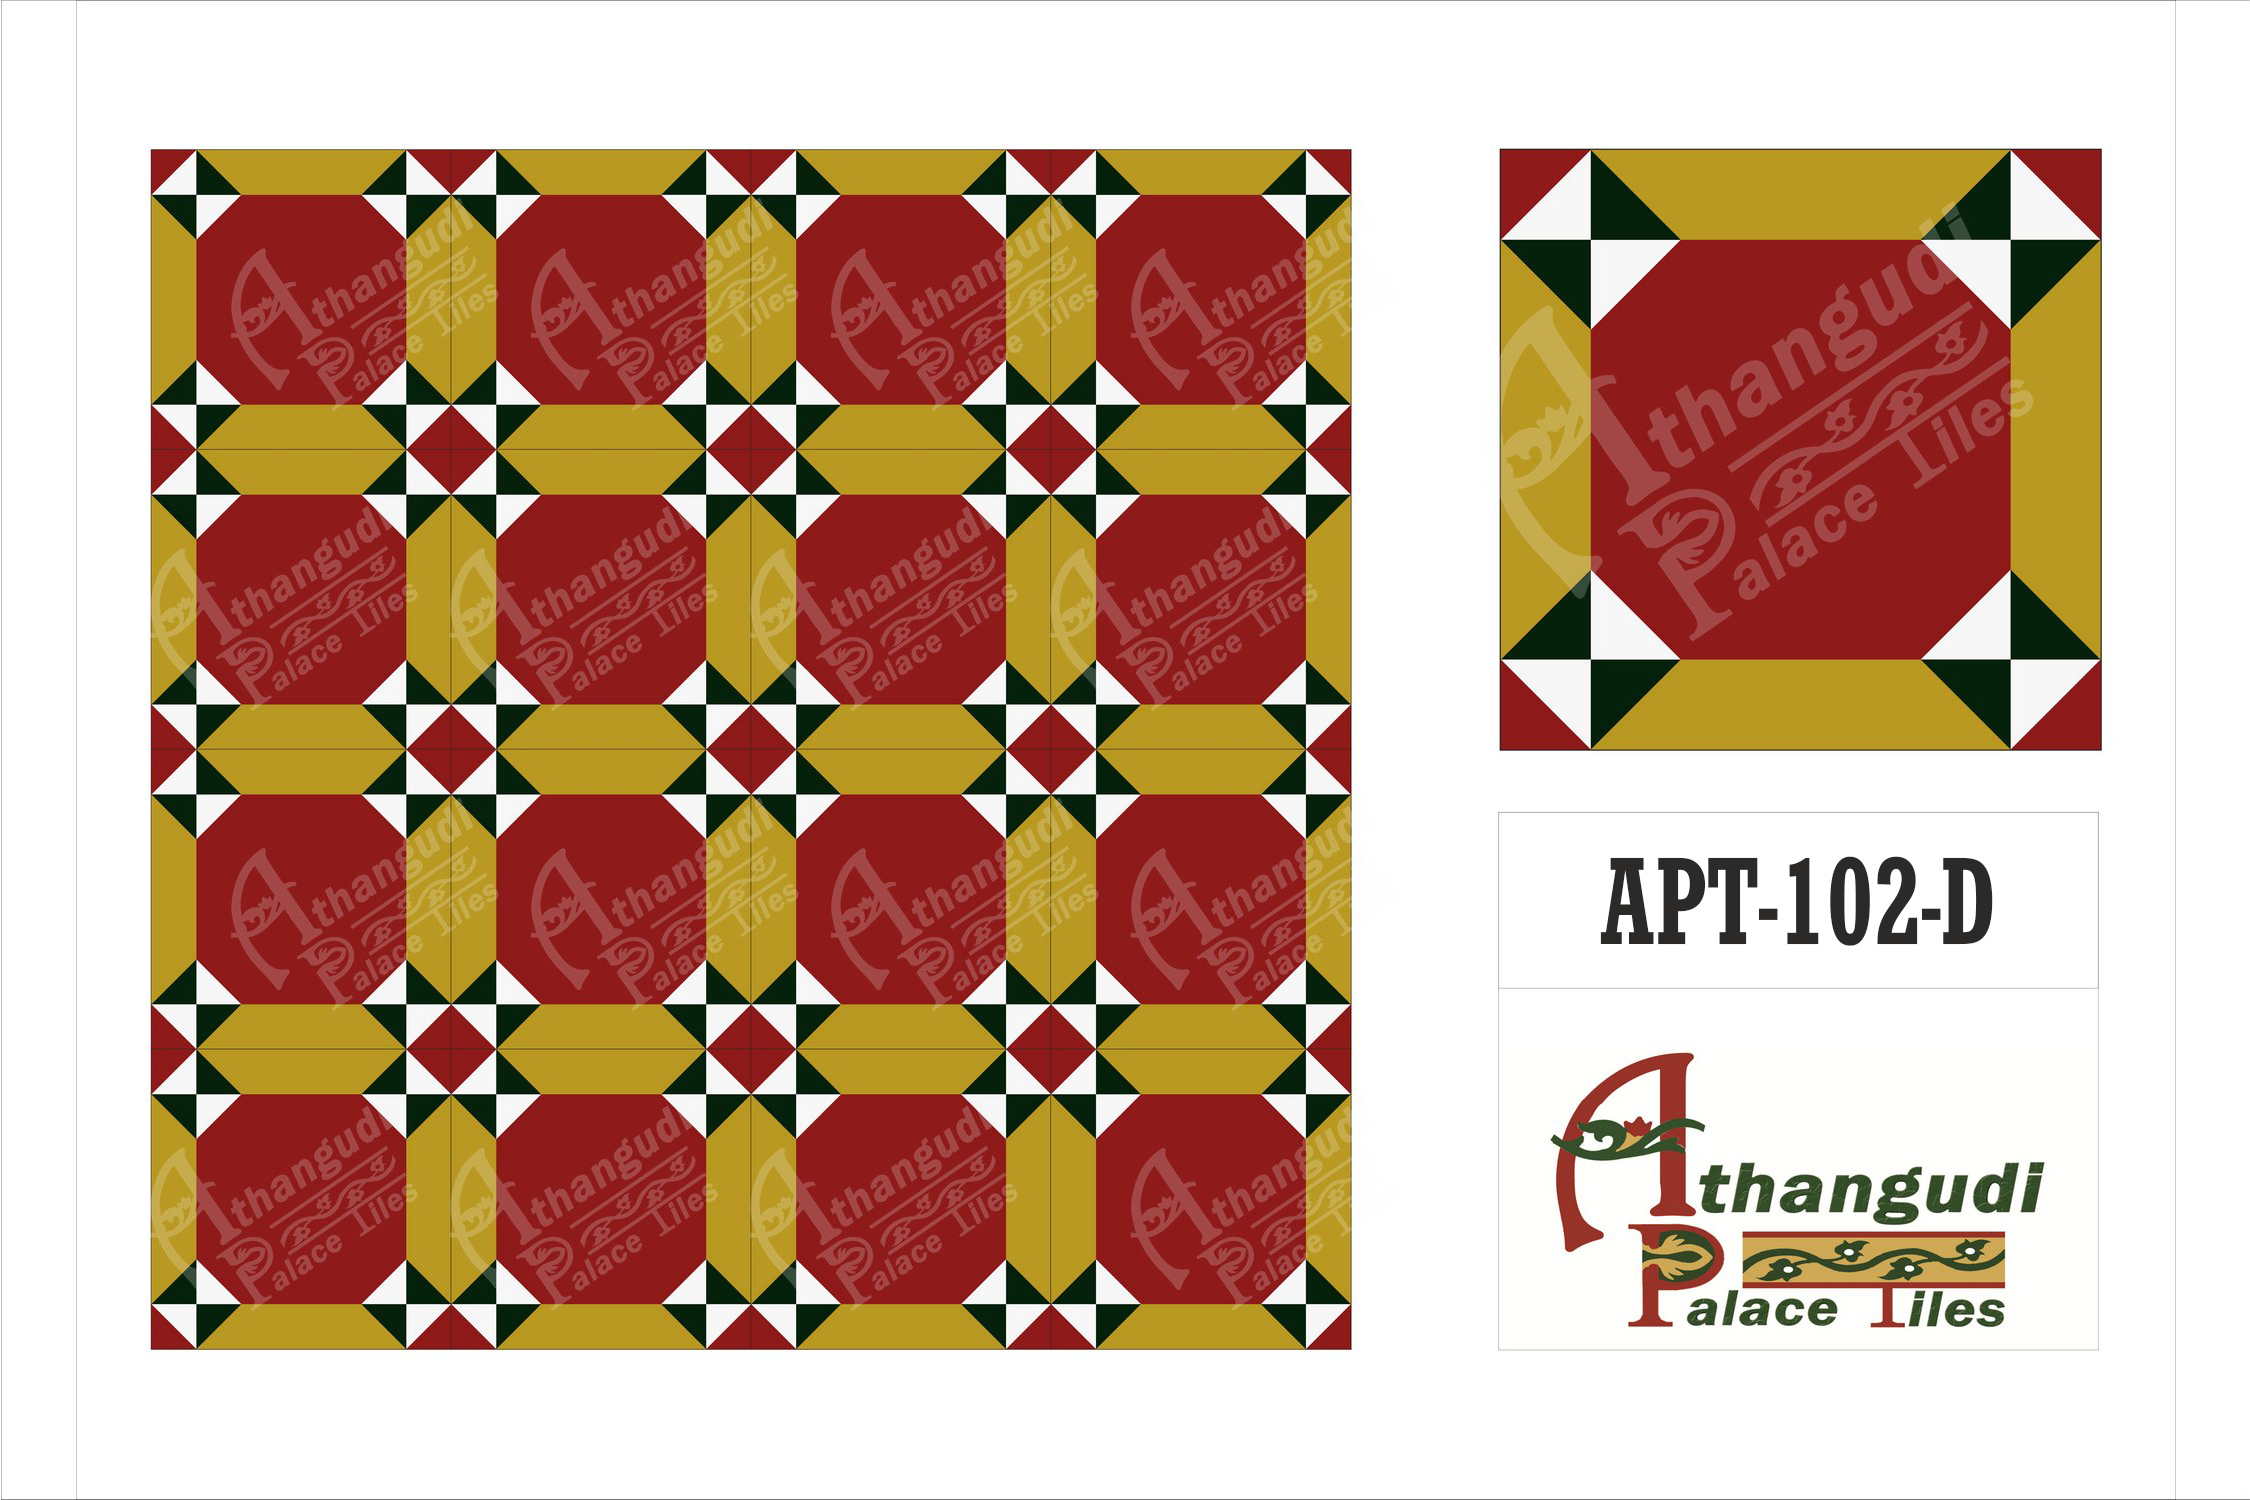 Best Quality products from Athangudi Tiles - Athangudi Palace Tiles